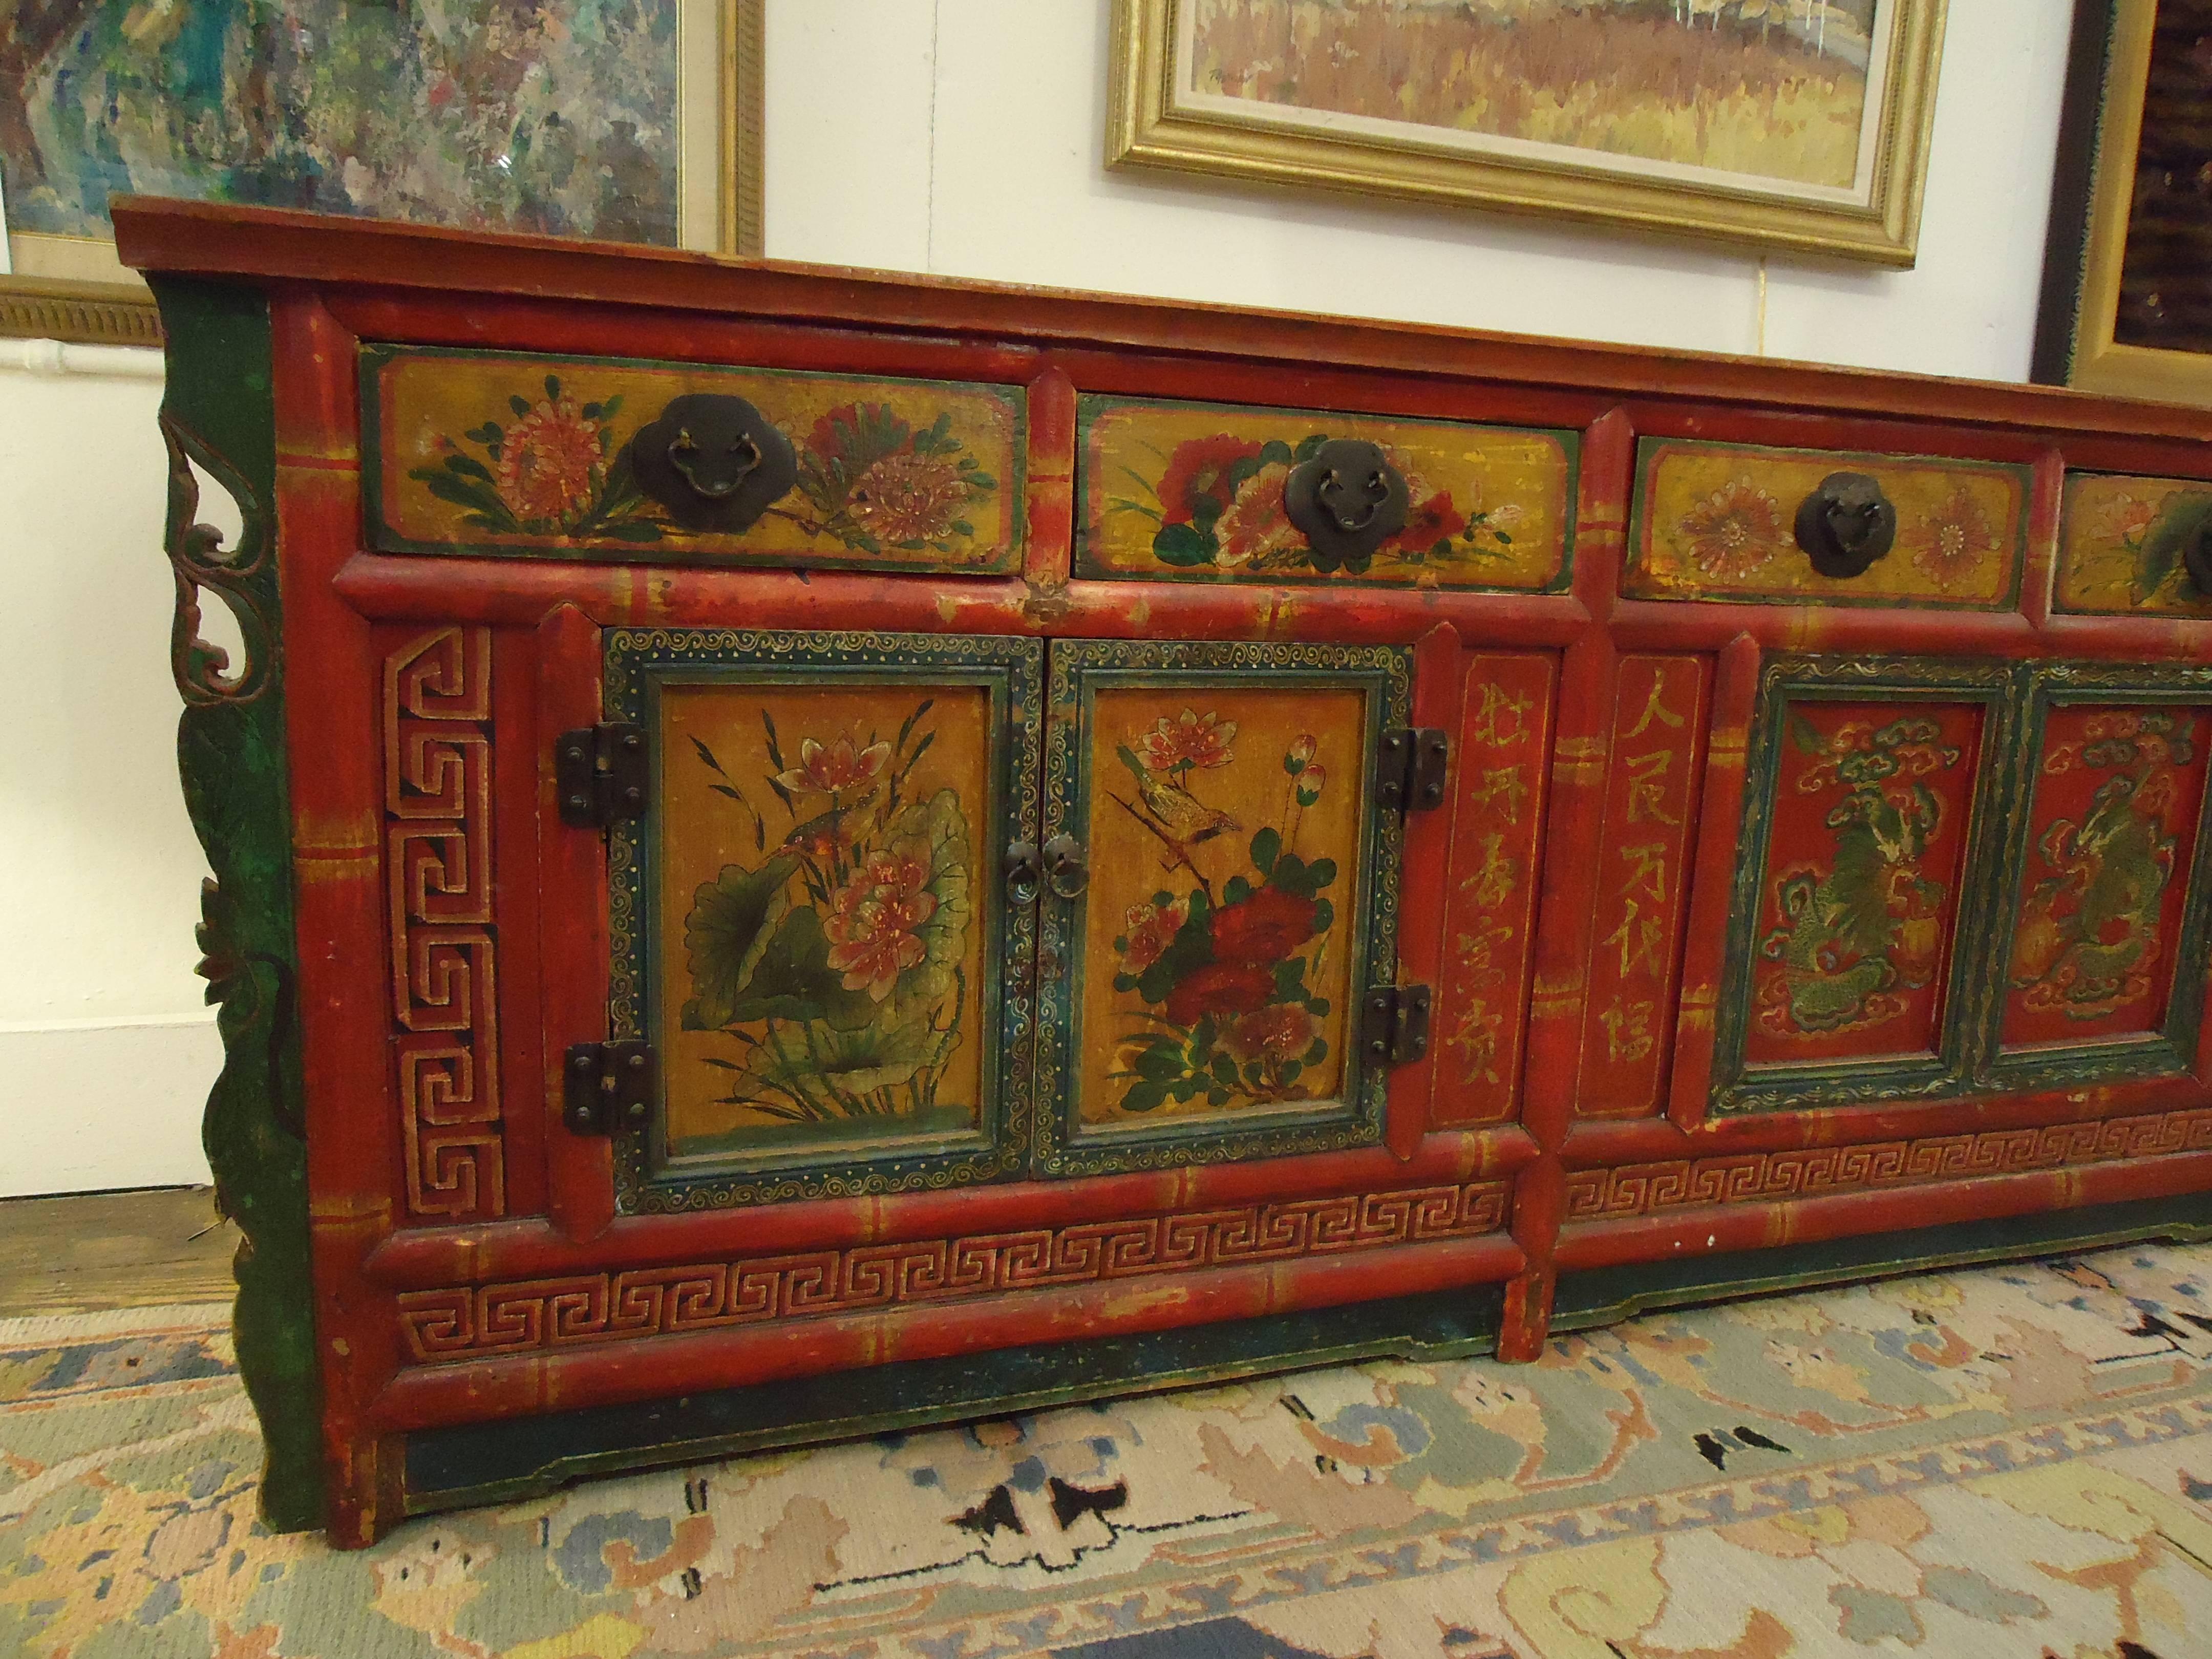 Very long hand-painted wooden cabinet with fabulous decoration in opposing colors of red and green with dragons, flowers, Greek key, etc. Original hardware and lots of storage including six drawers and two pairs of panelled doors that open to lots